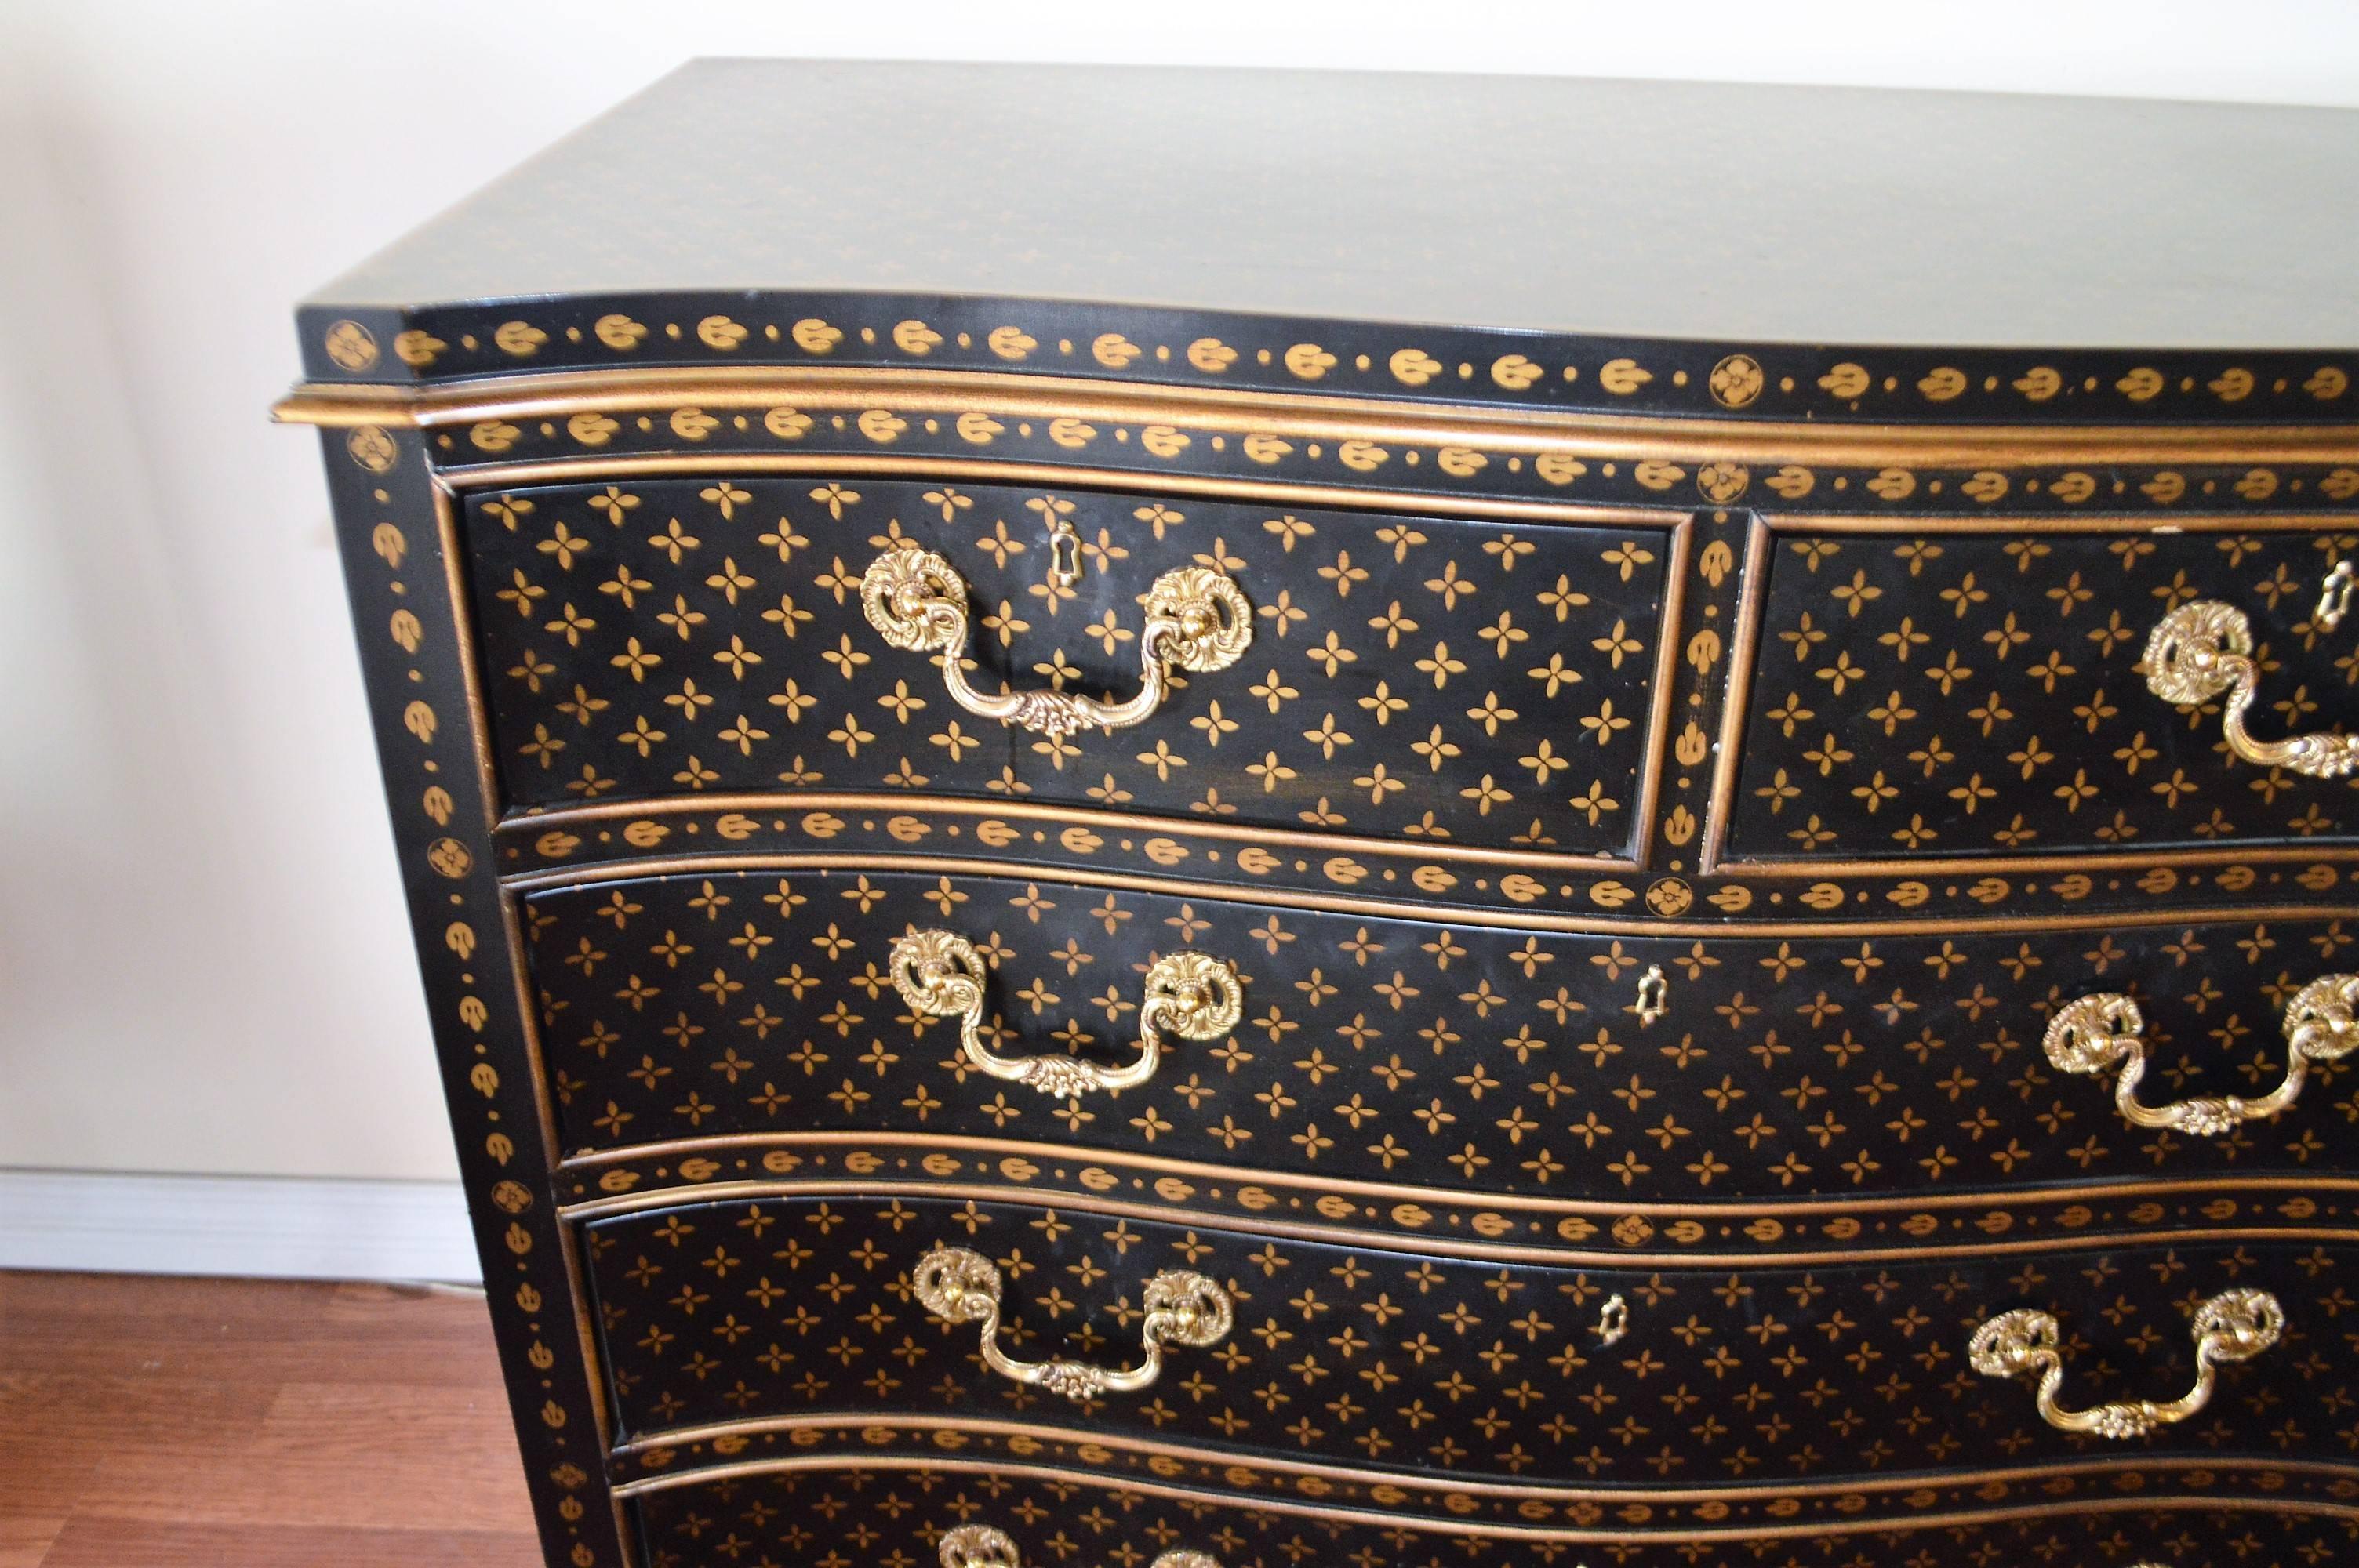 Highly decorative commode, finished in a Louis Vuitton inspired design with rich brass hardware. A very well made, all wood, heavy commode.